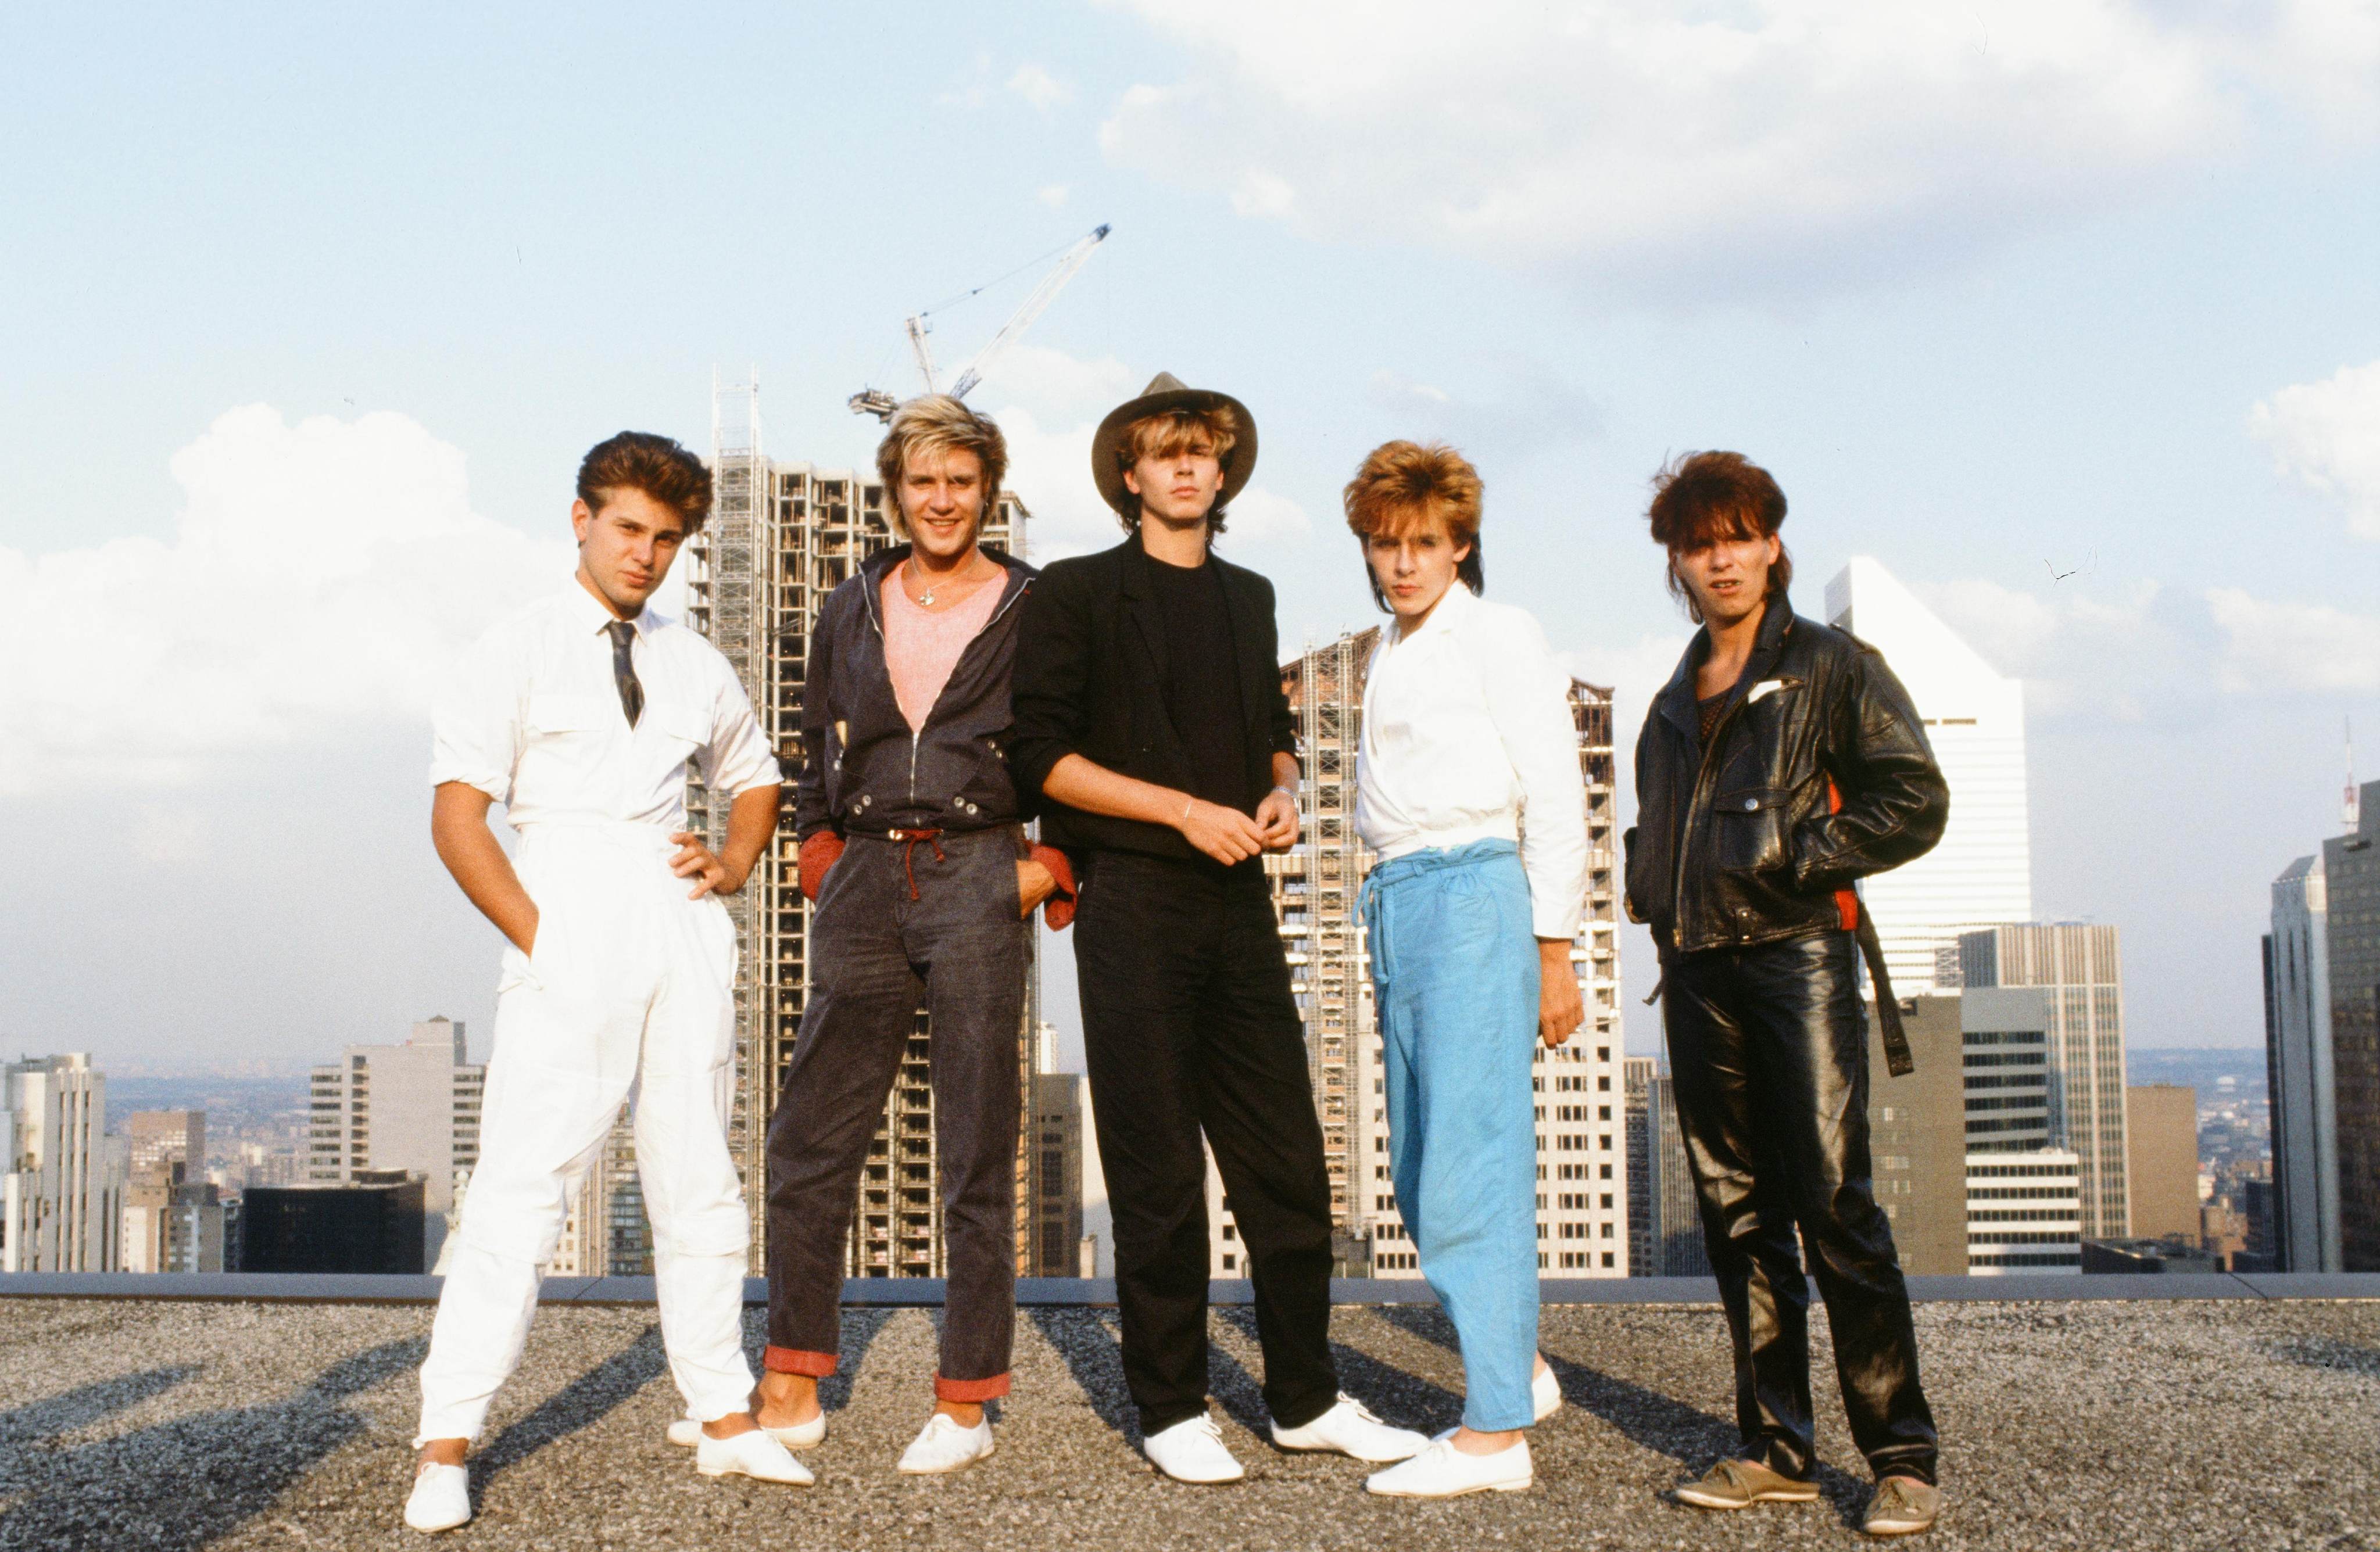 Duran Duran in New York in February, 1982. The British band are marking 40 years as a group with their 15th studio album, Future Past. Photo: 
David Tan/Shinko Music/Getty Images